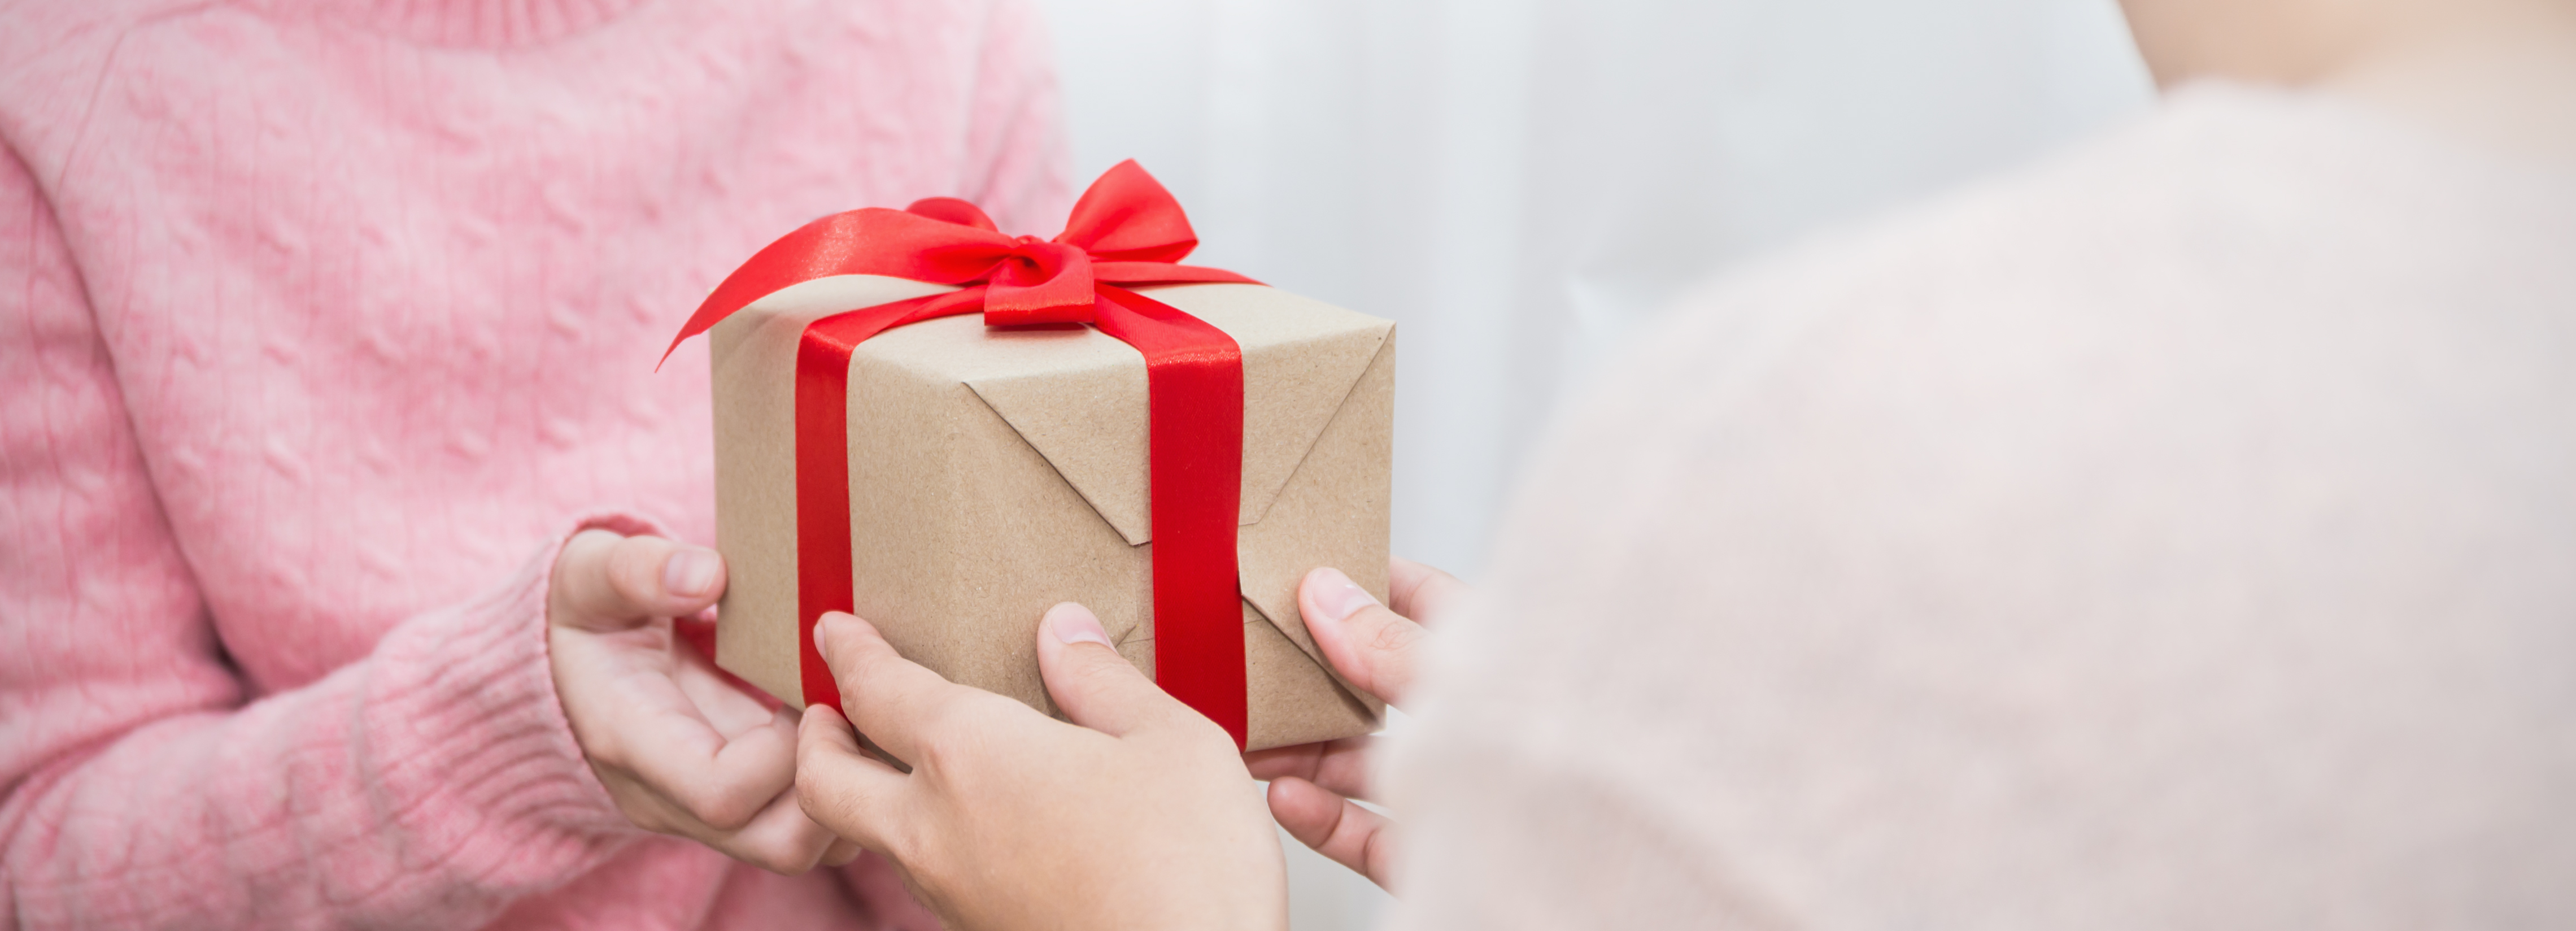 6 Unspoken Chinese New Year Gift Giving Etiquette Rules